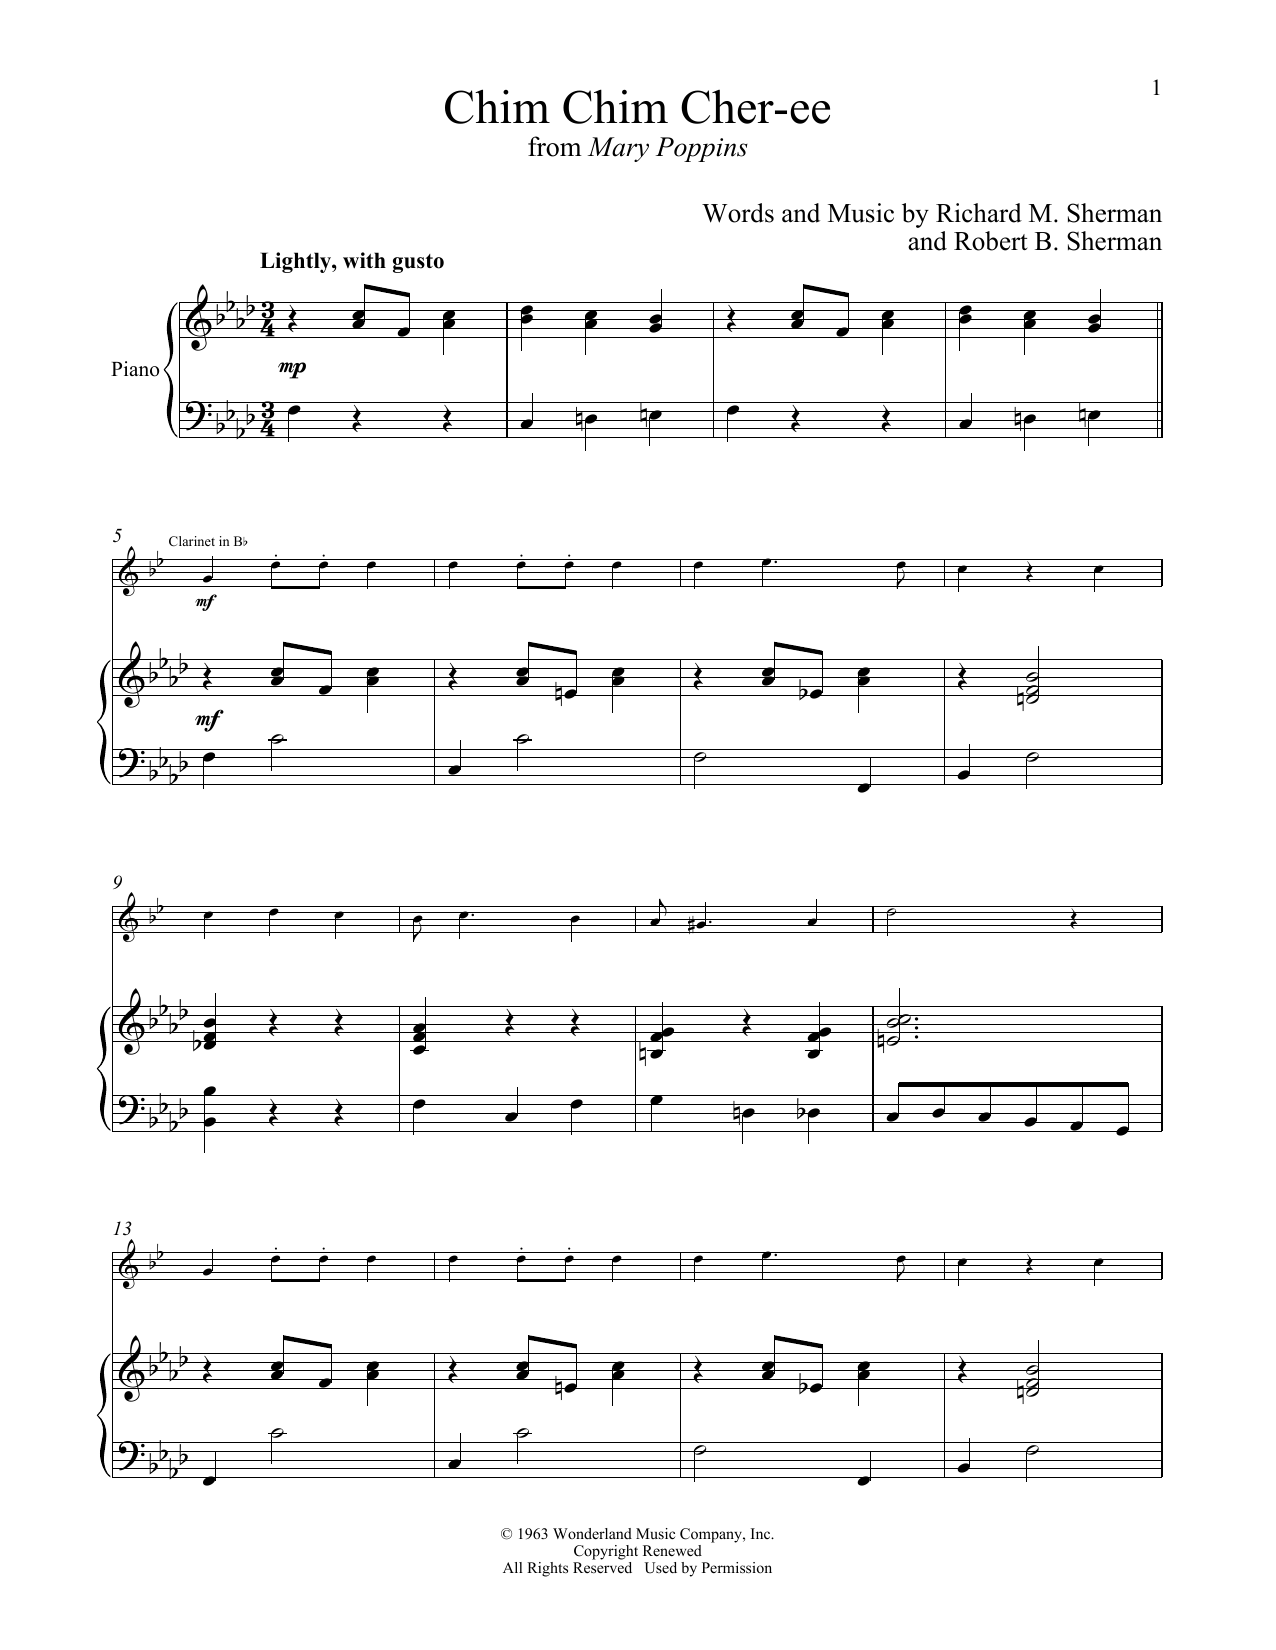 Download Sherman Brothers Chim Chim Cher-ee (from Mary Poppins) Sheet Music